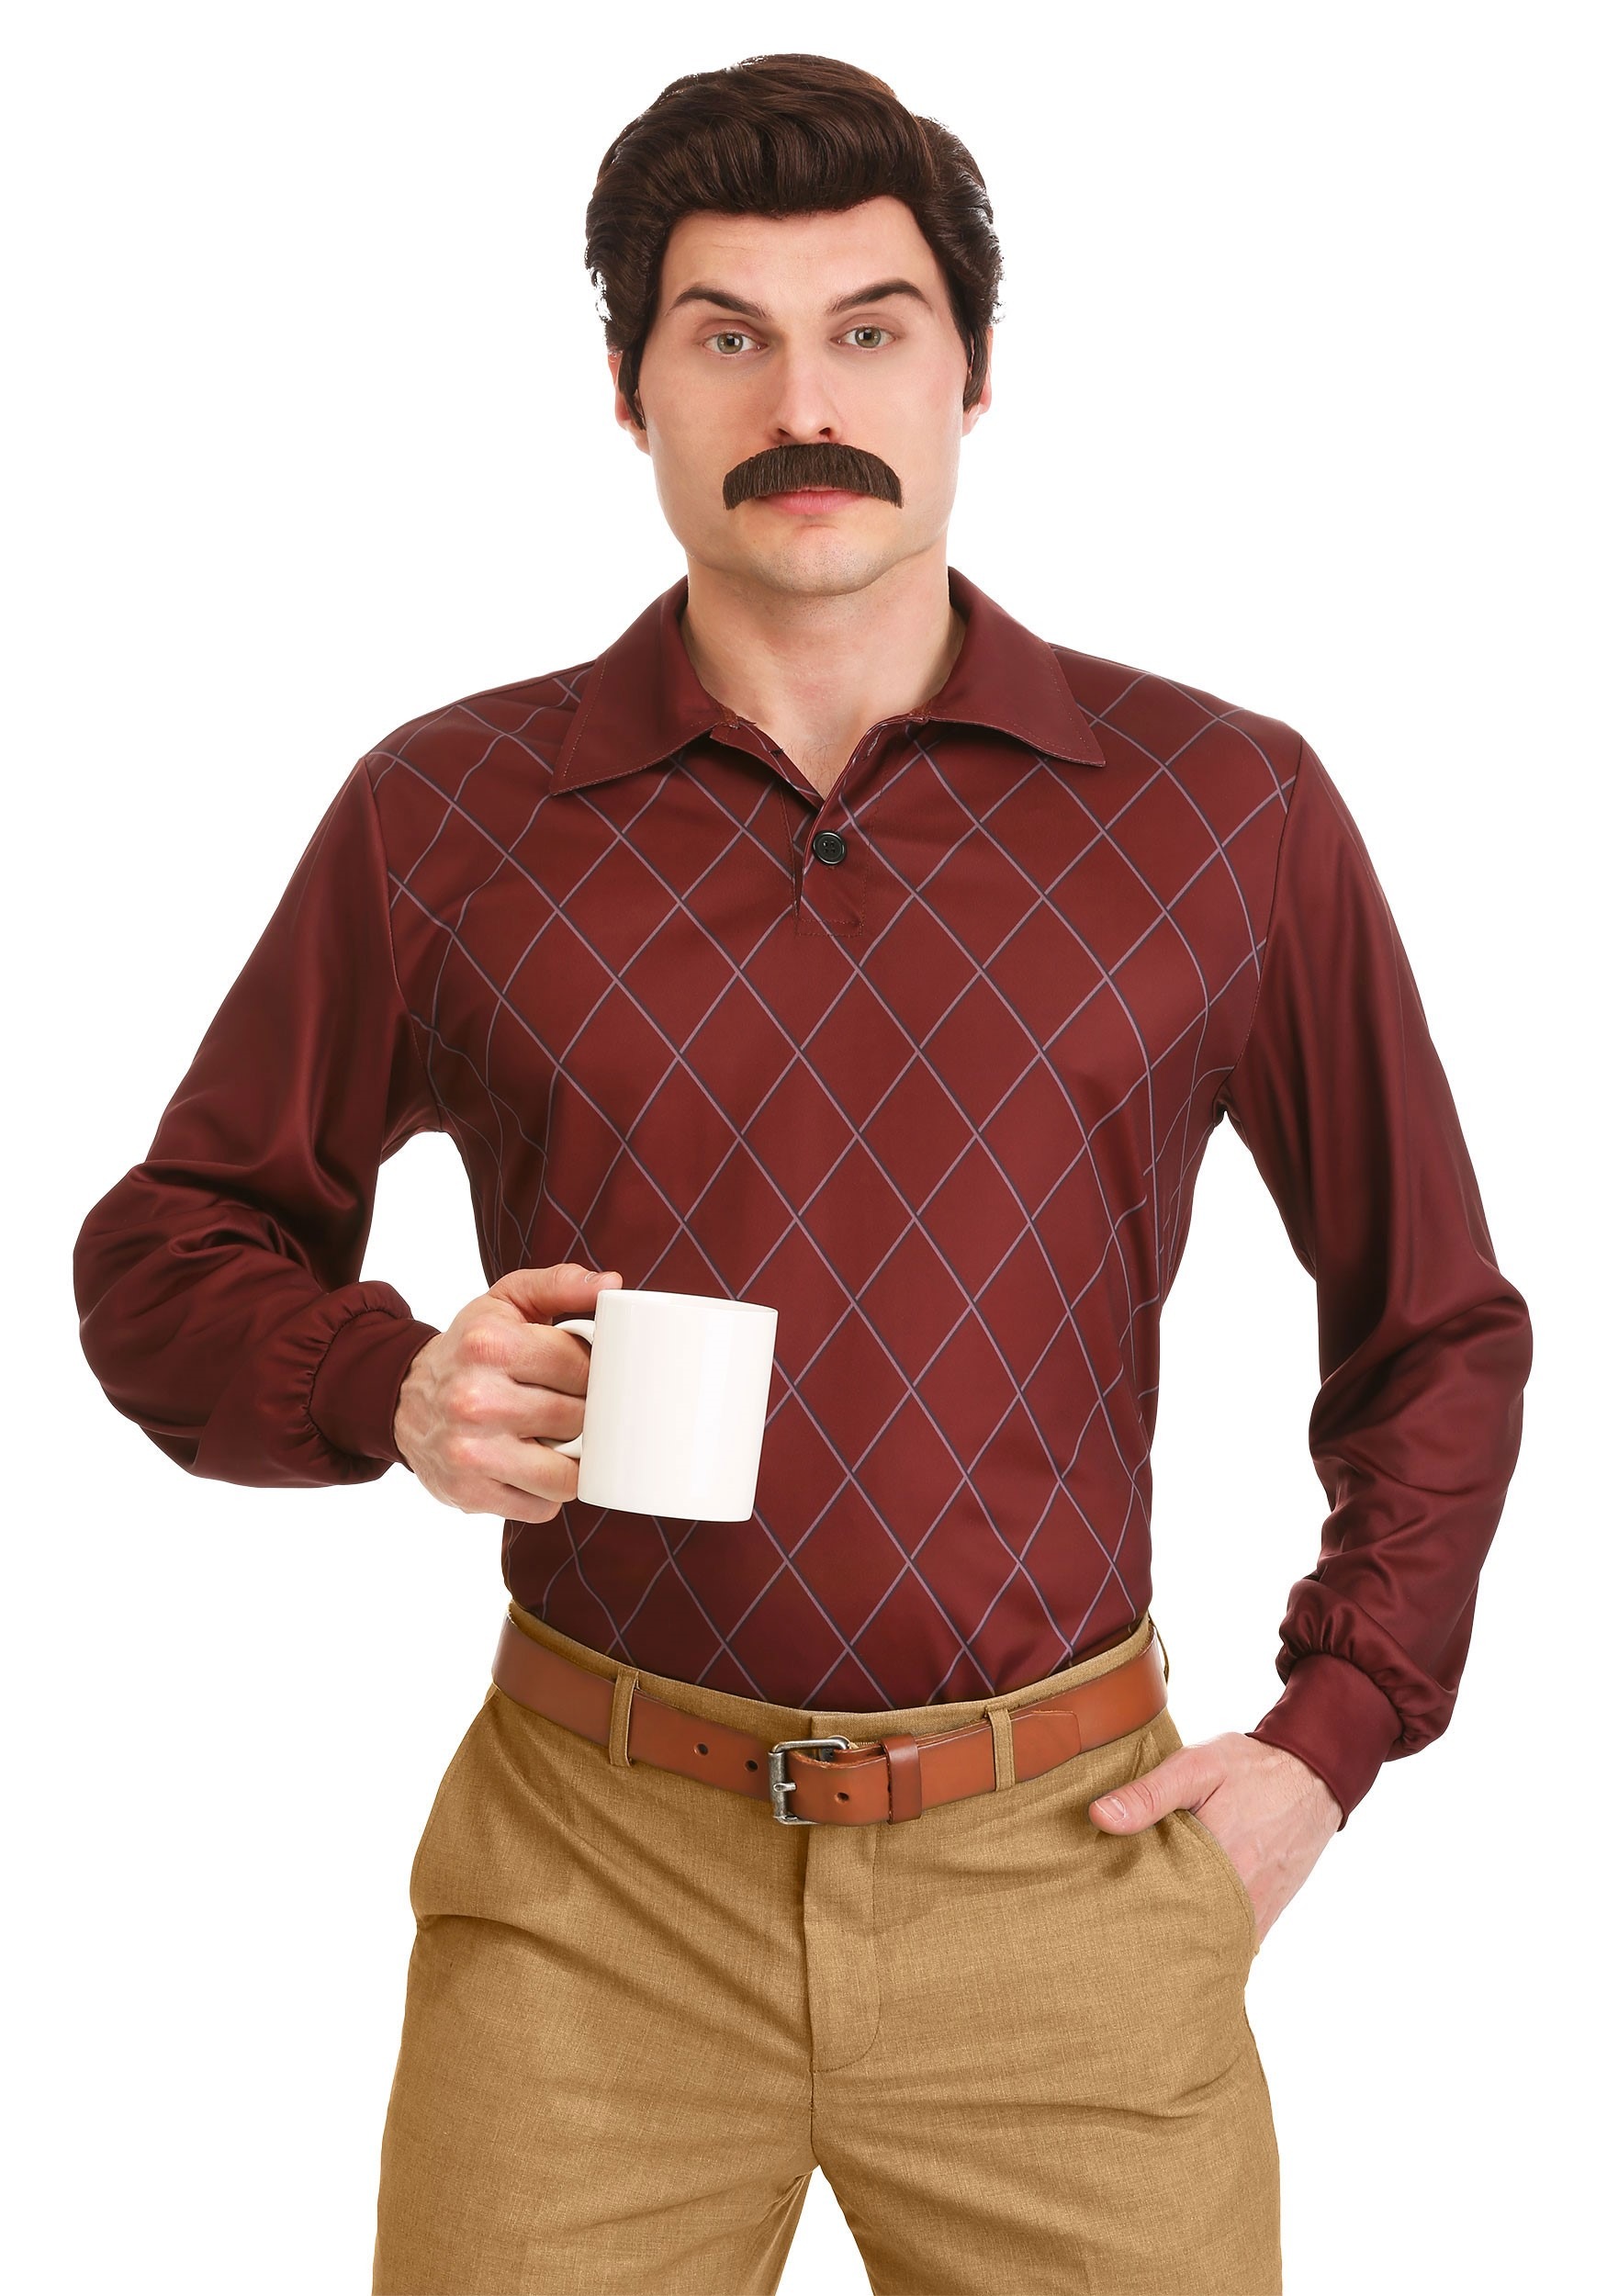 Photos - Fancy Dress A&D FUN Costumes Ron Swanson Parks and Recreation Costume Brown/Red FUN148 